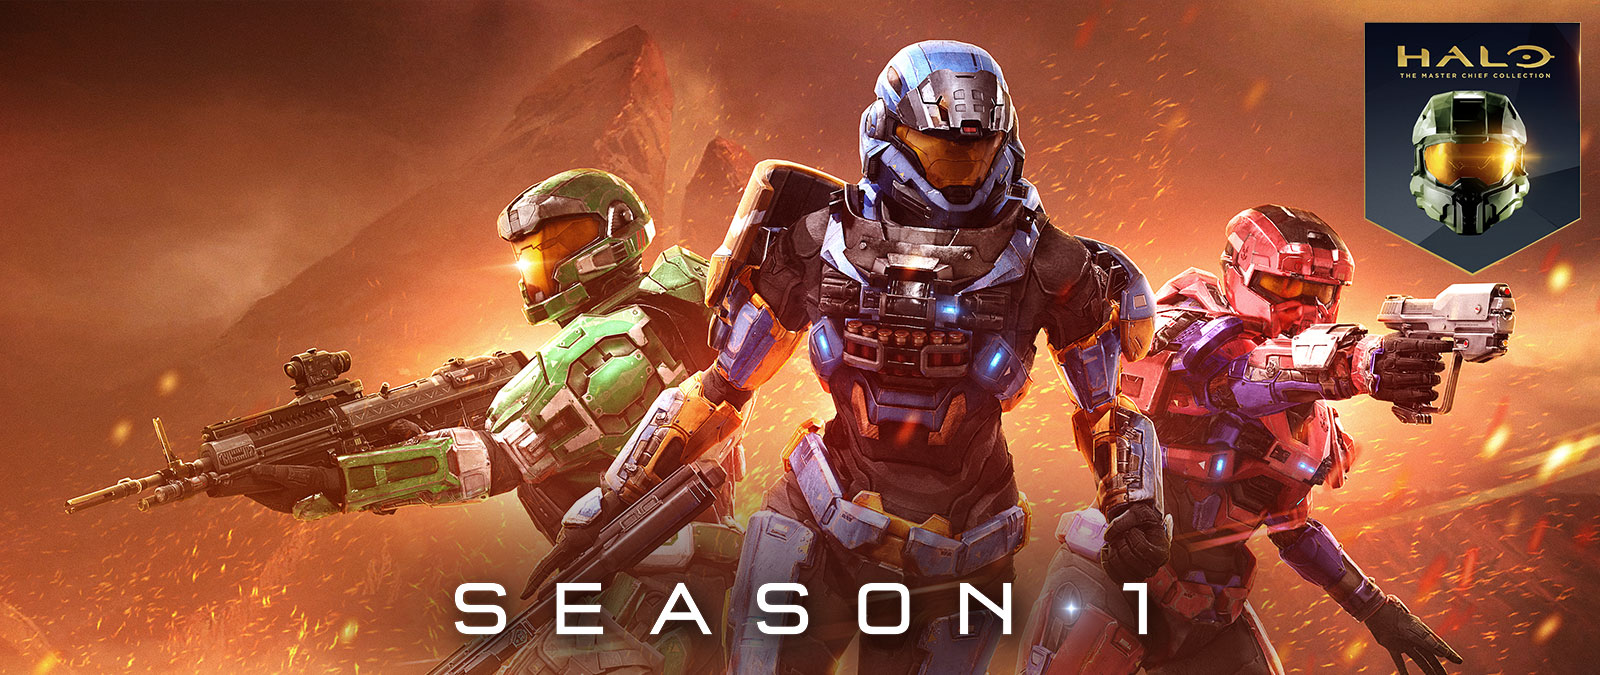 Halo: The Master Chief Collection, Season 1, 3 personages uit Halo: Reach staan in een vurig landschap